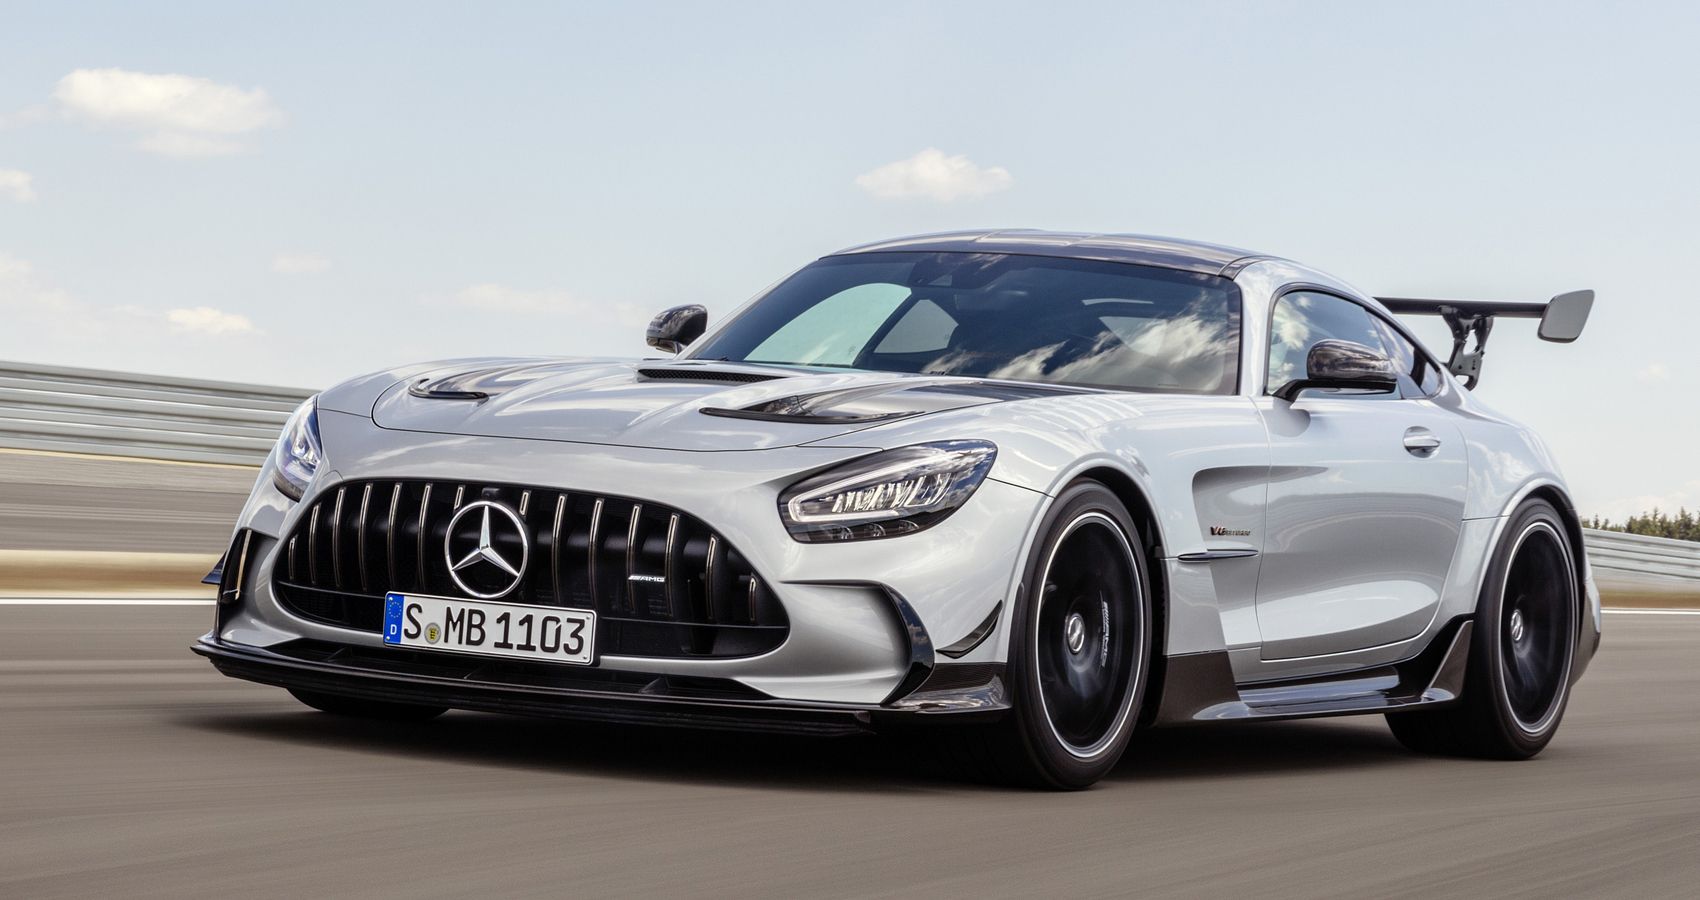 The front of the AMG GT Black Series on track